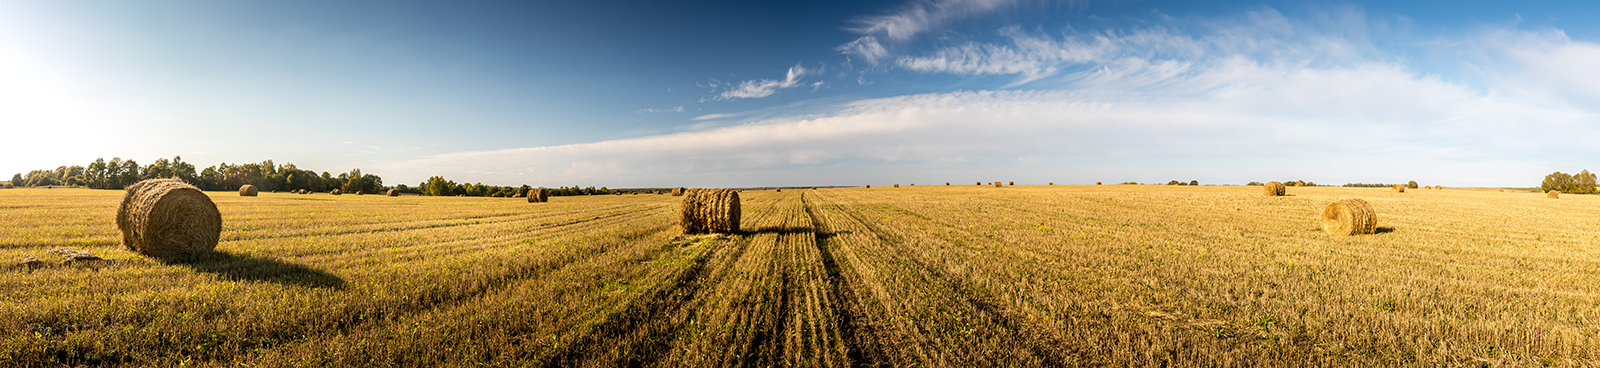 image of a field with hay bales